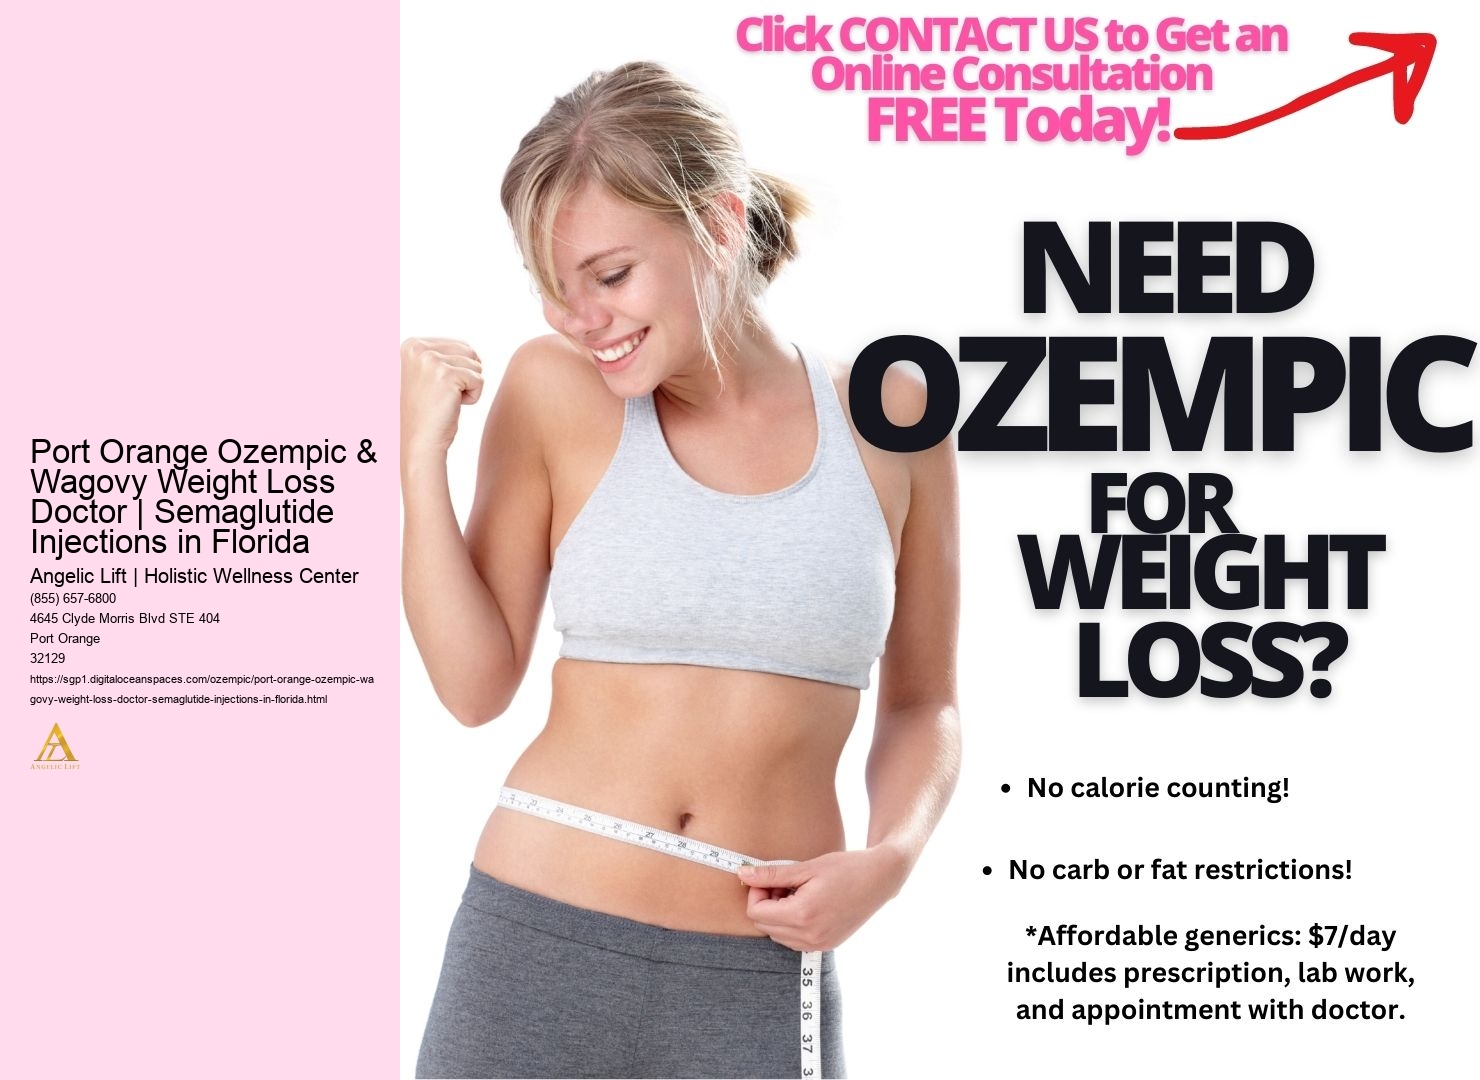 Port Orange Ozempic & Wagovy Weight Loss Doctor | Semaglutide Injections in Florida